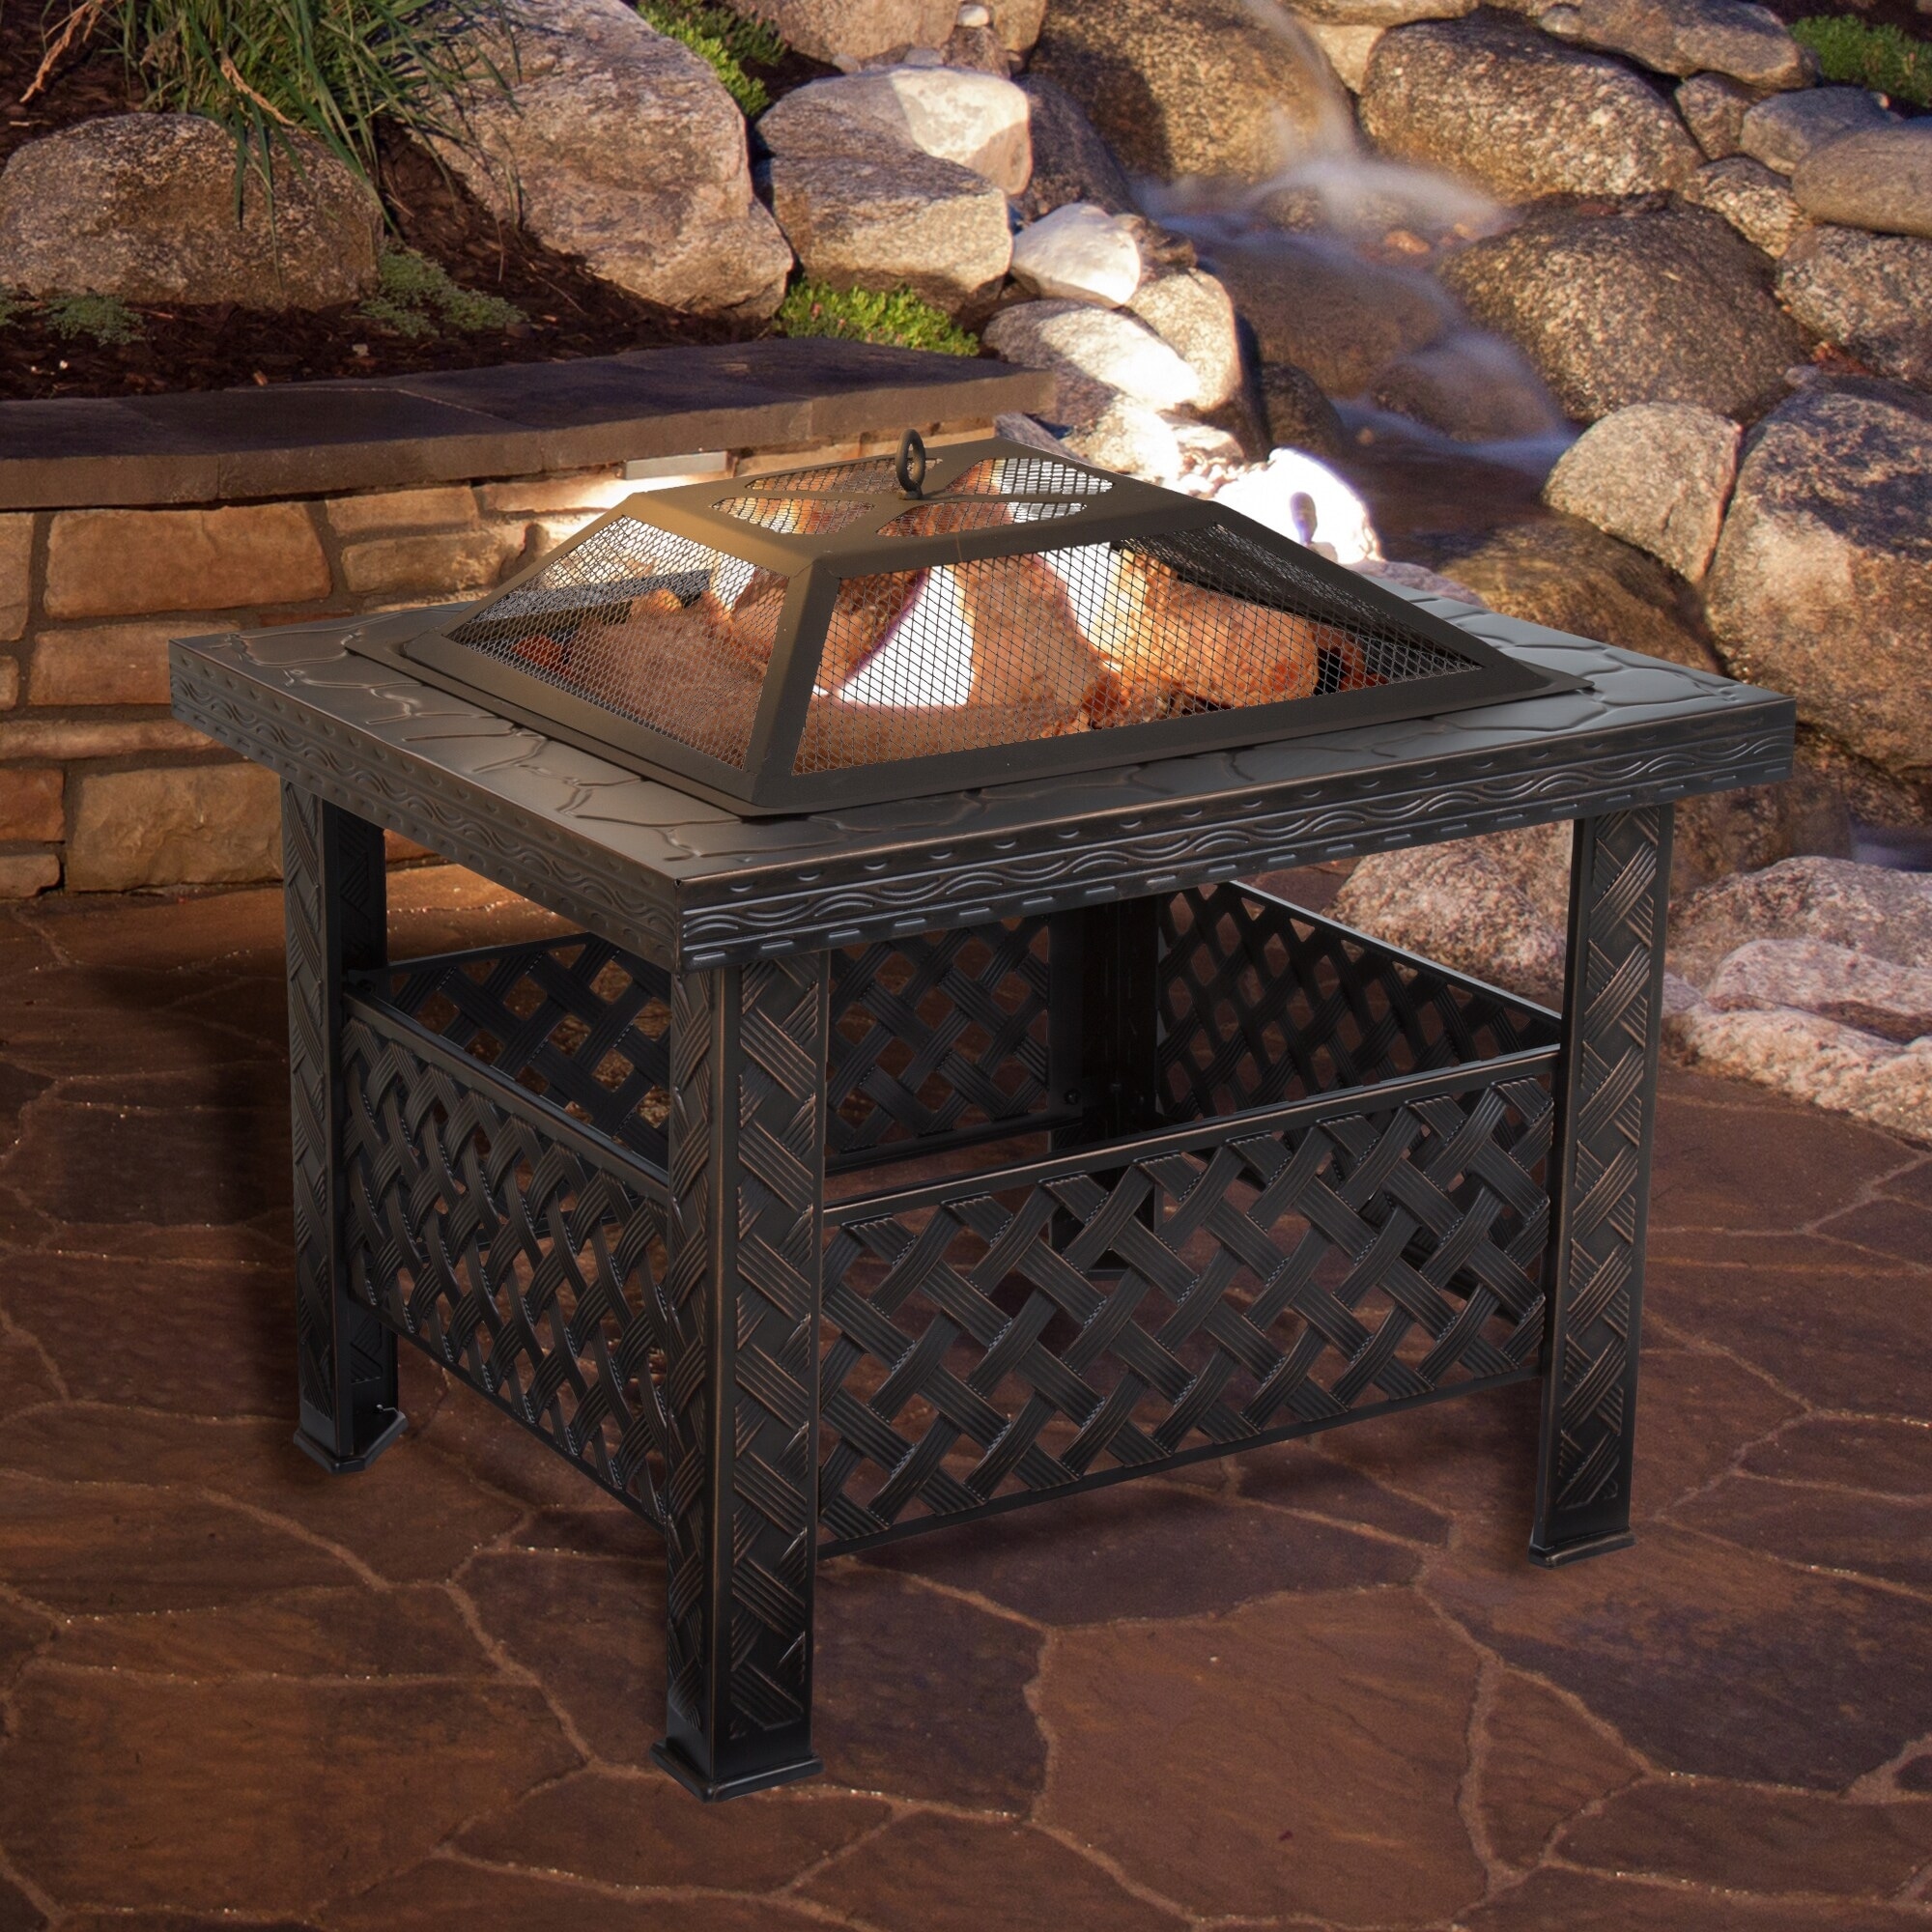 Pure Garden 26 inch Square Wood Burning Metal Fire Pit with Cover - Bronze - 26 x 26 x 20